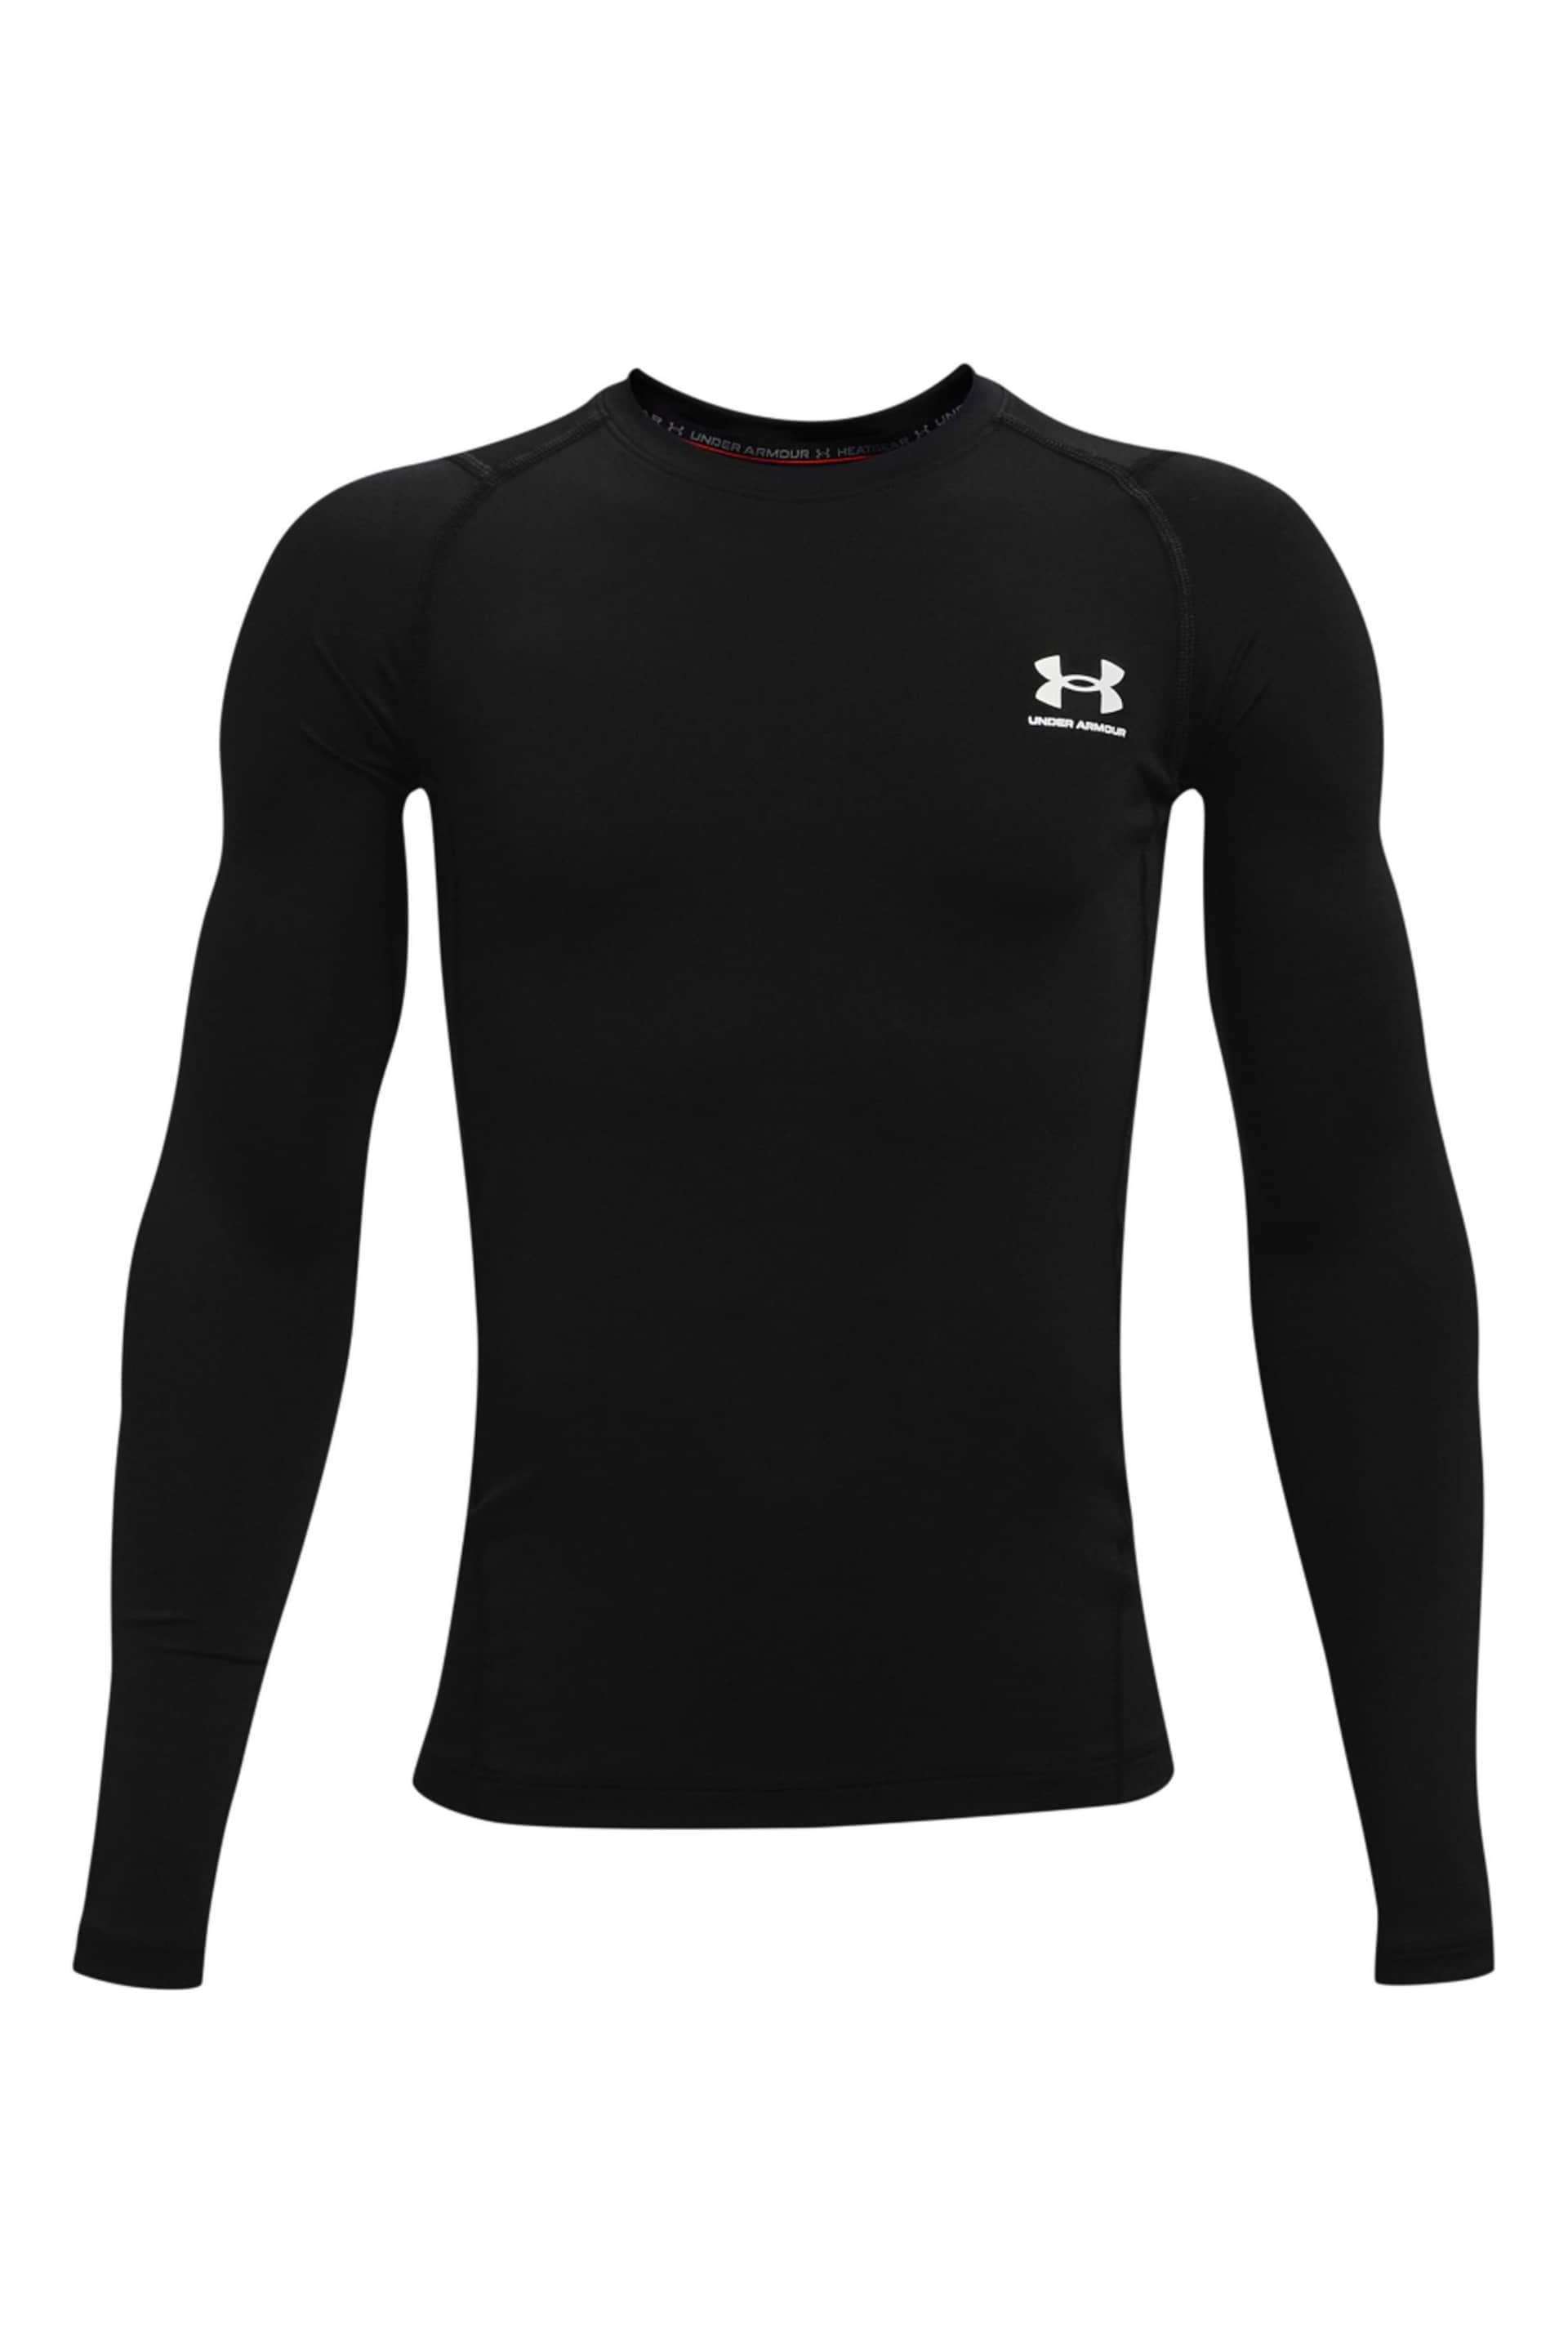 Under Armour Black/White Heat Gear Long Sleeve Top - Image 1 of 2